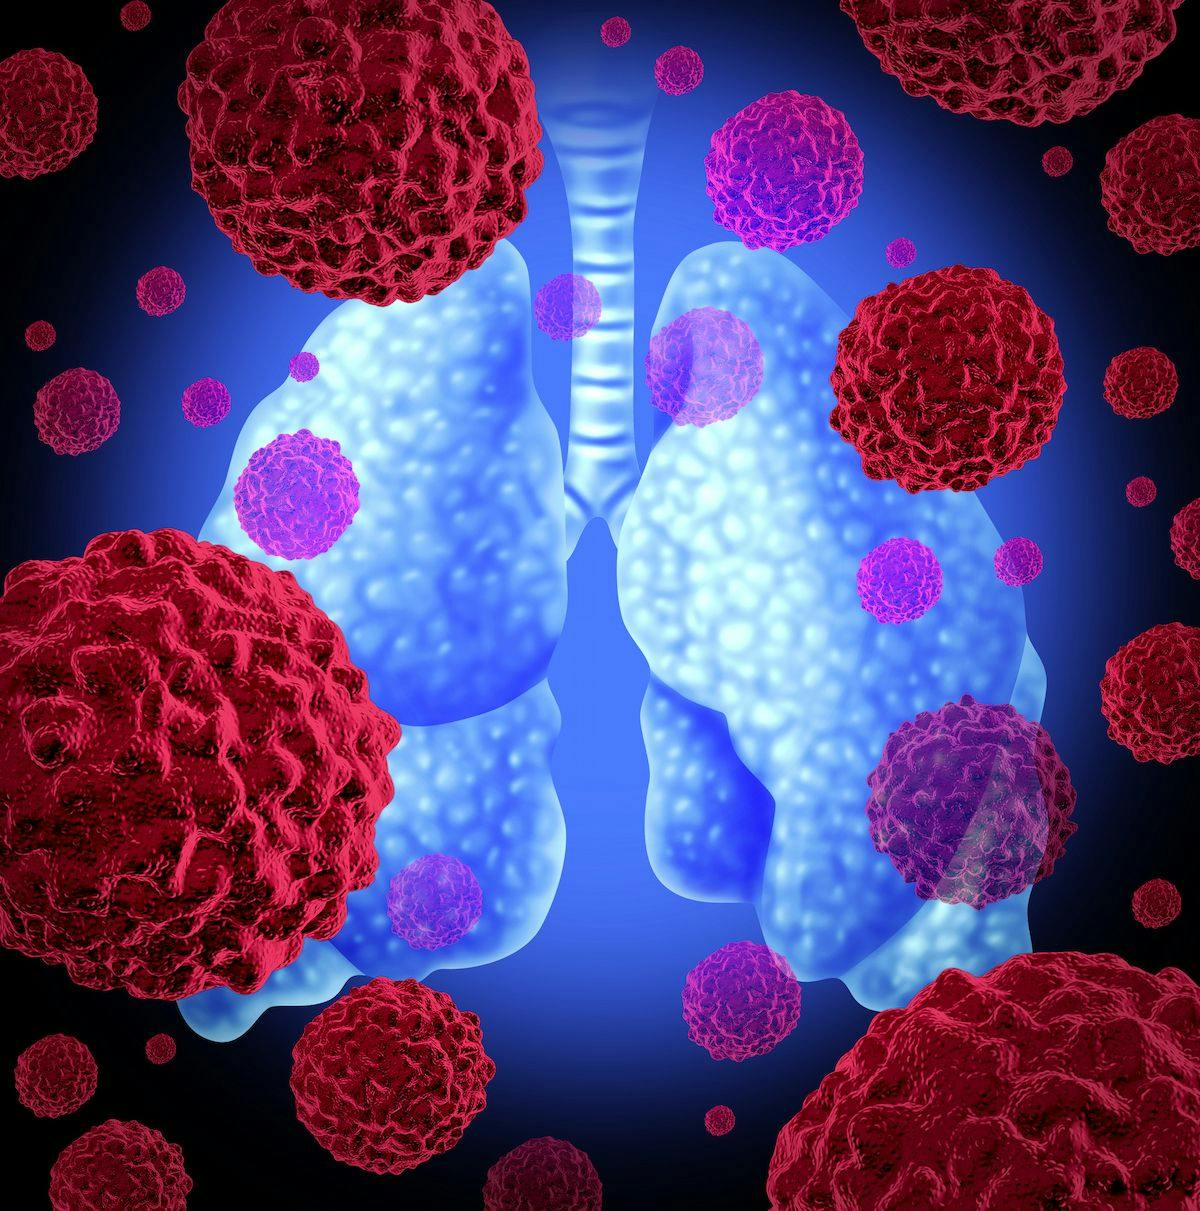  “While the PACIFIC-2 trial results did not show what we hoped, the PACIFIC regimen remains the standard of care for patients with unresectable, stage III [NSCLC],” according to Jeffrey D. Bradley, MD.